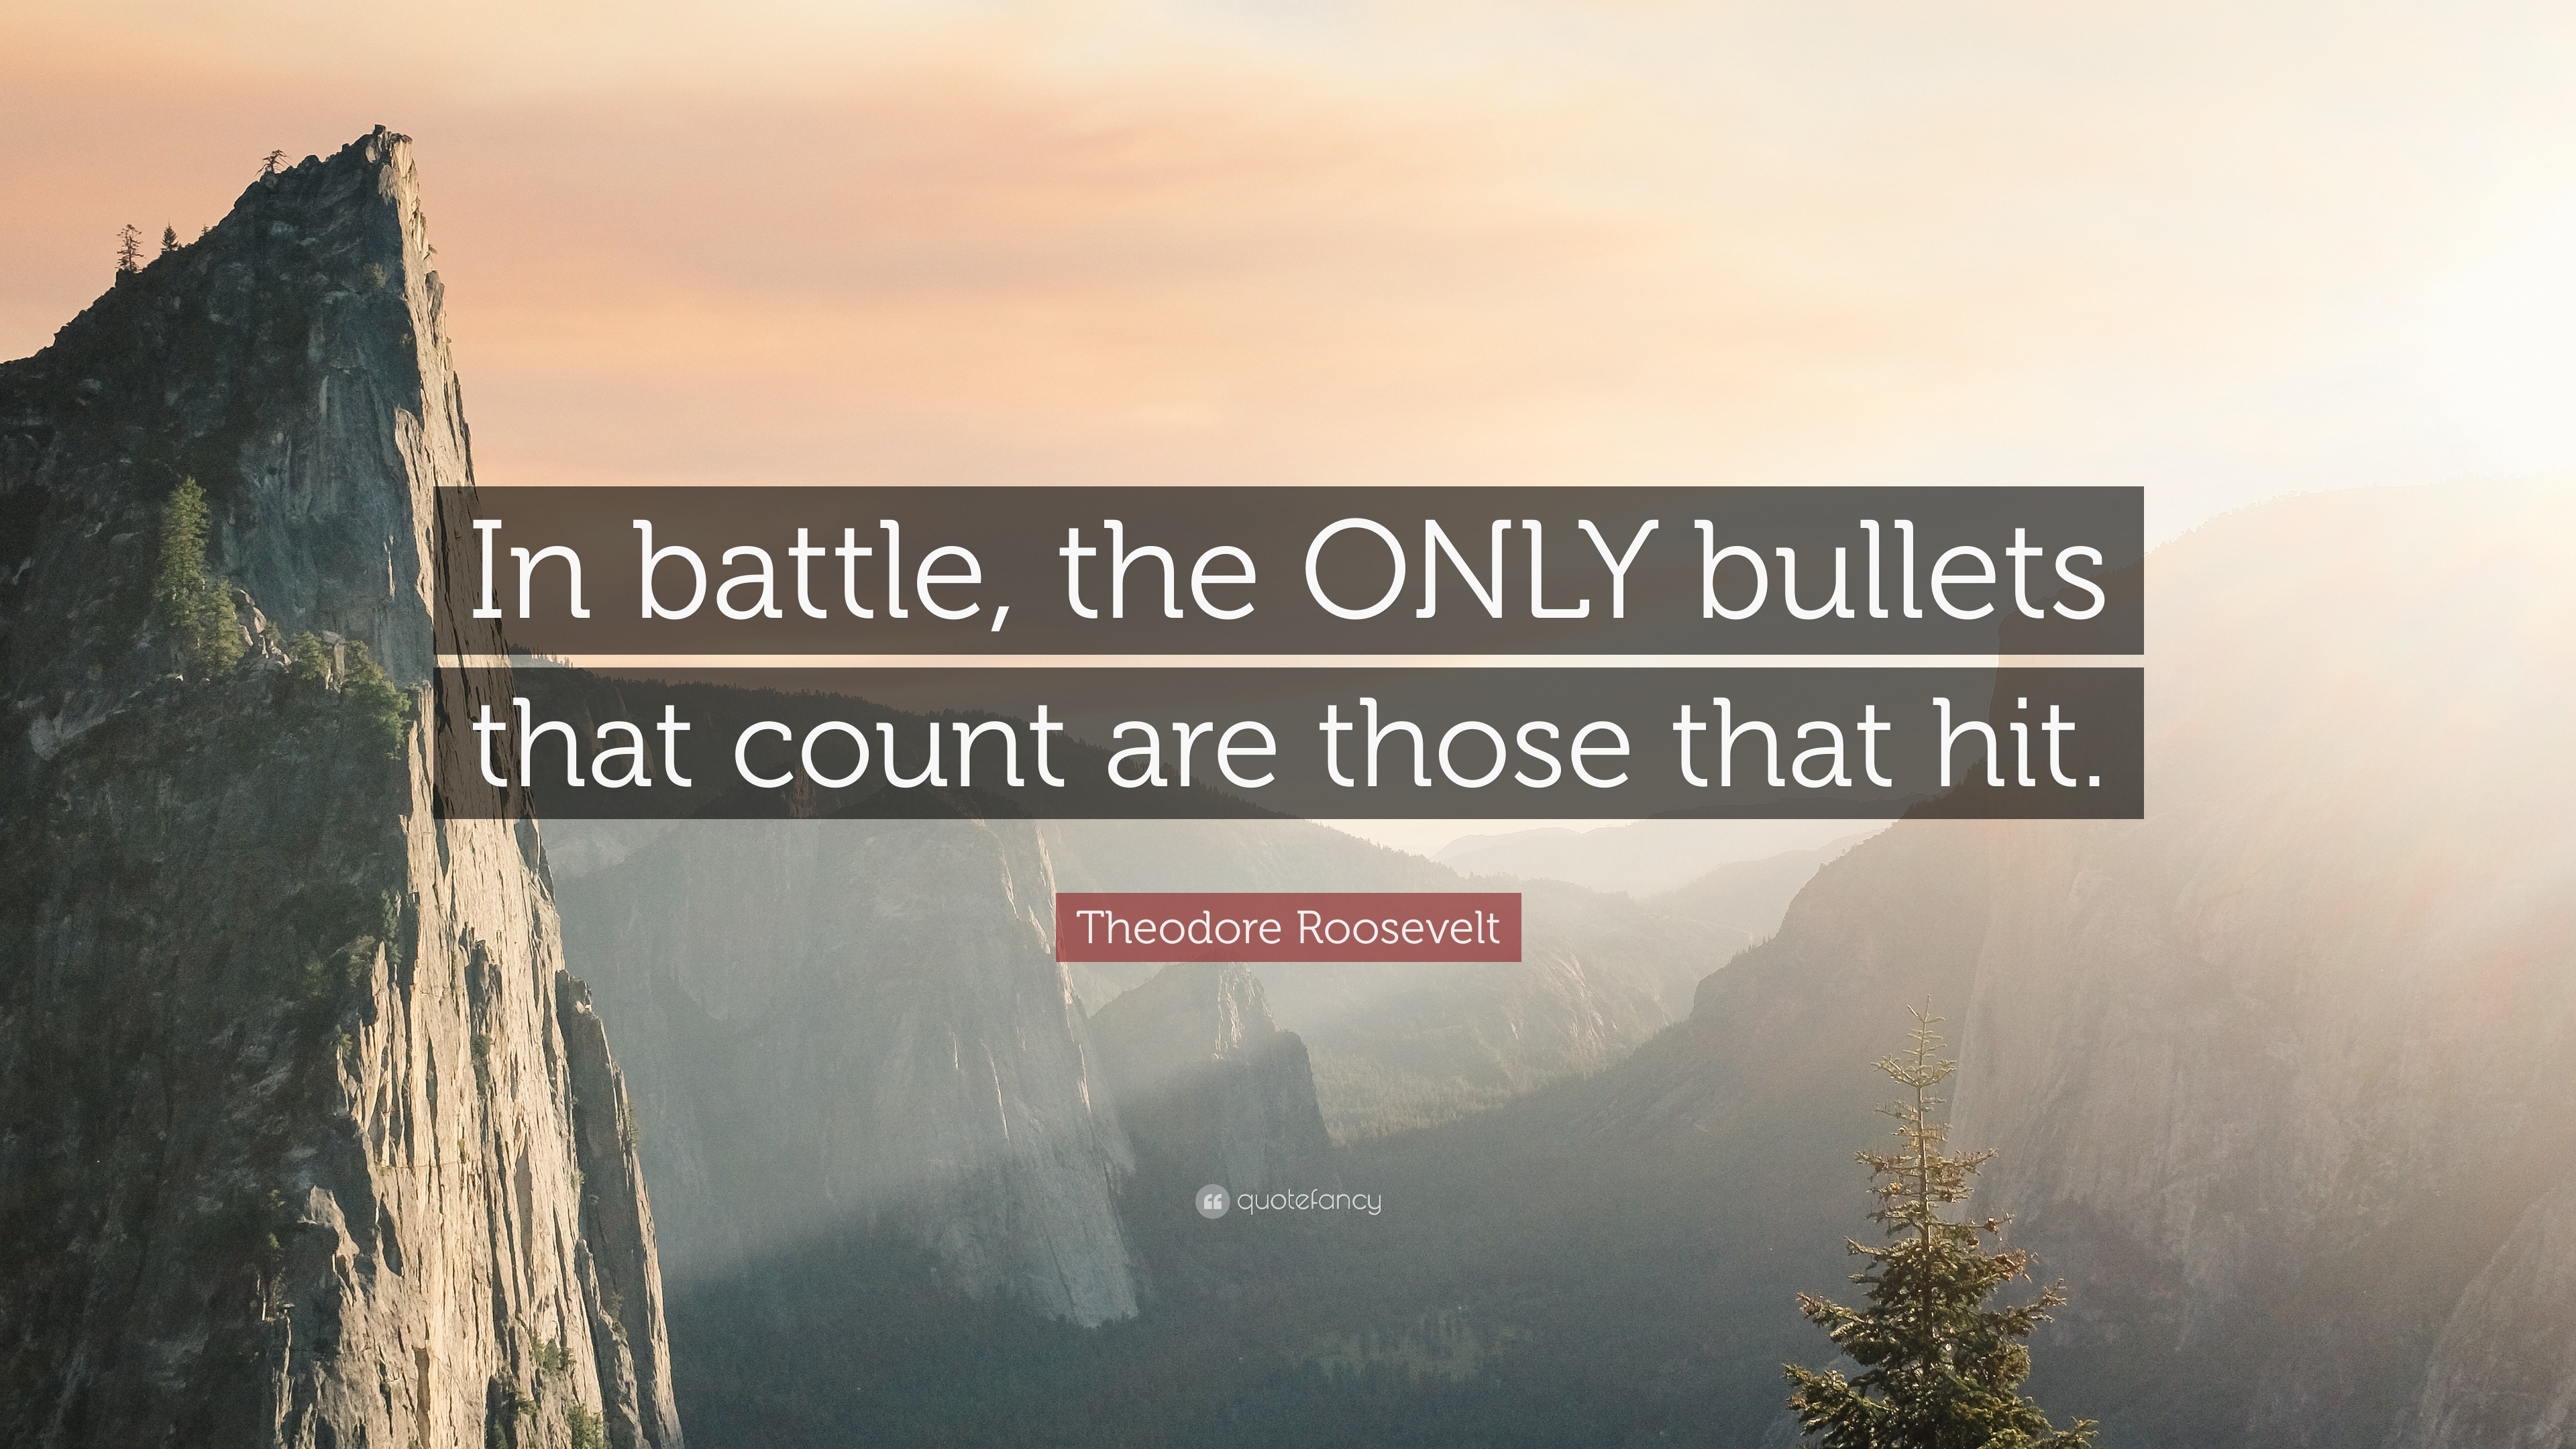 https://quotefancy.com/media/wallpaper/3840x2160/148883-Theodore-Roosevelt-Quote-In-battle-the-ONLY-bullets-that-count-are.jpg